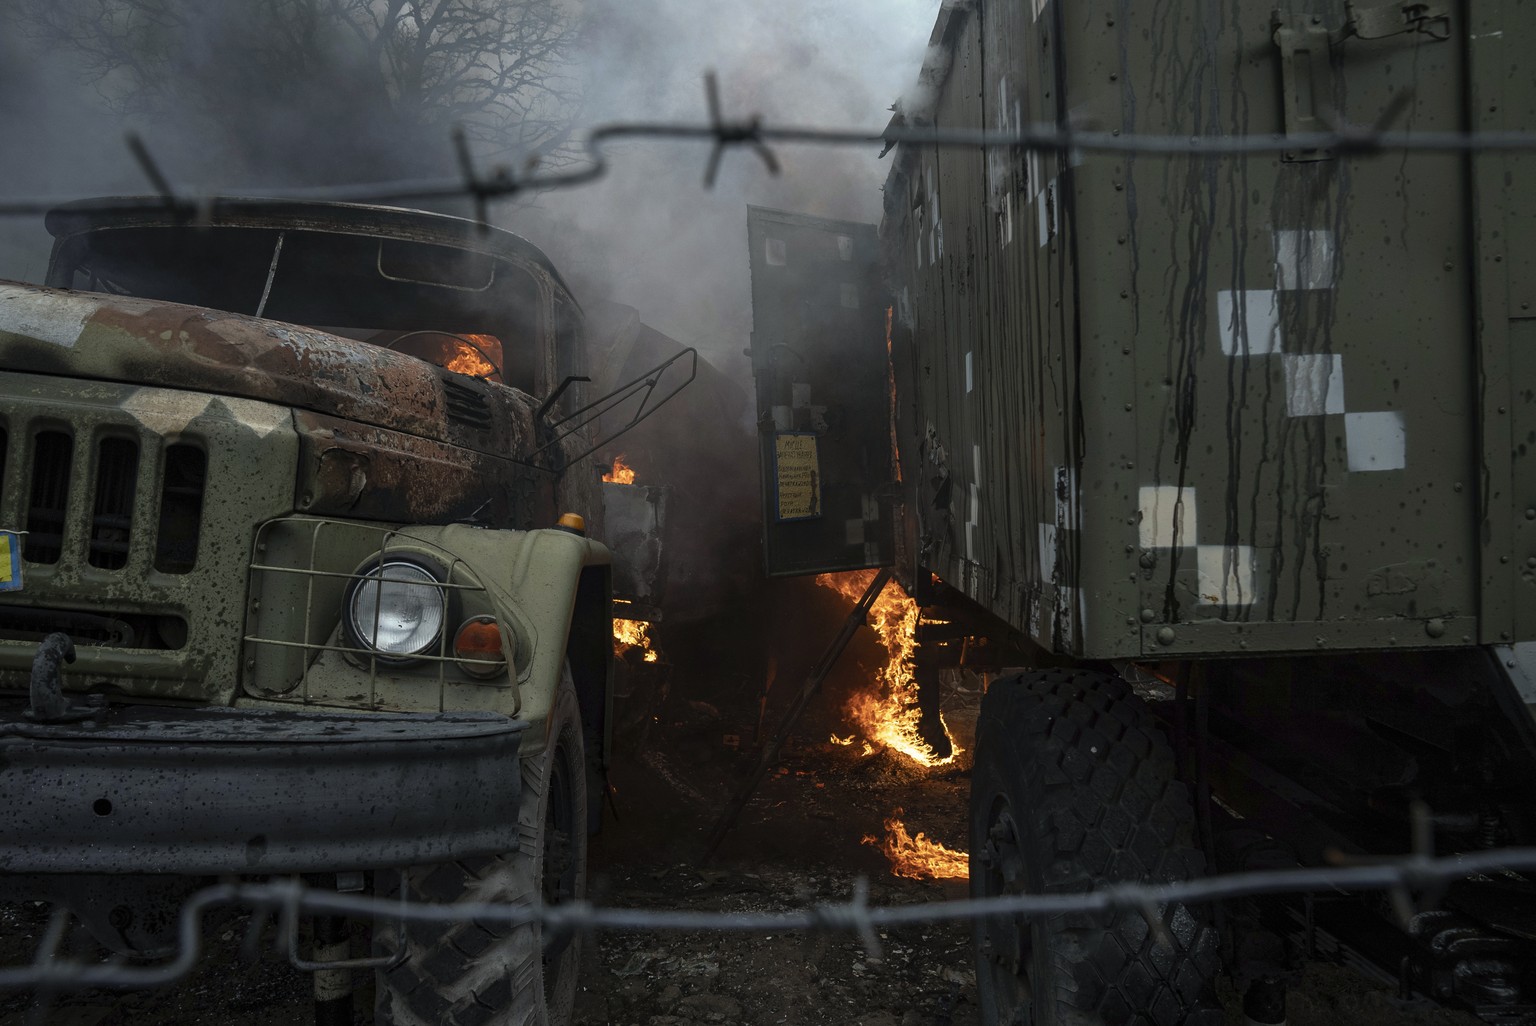 Ukrainian military track burns at an air defence base in the aftermath of an apparent Russian strike in Mariupol, Ukraine, Thursday, Feb. 24, 2022. Russian troops have launched their anticipated attac ...